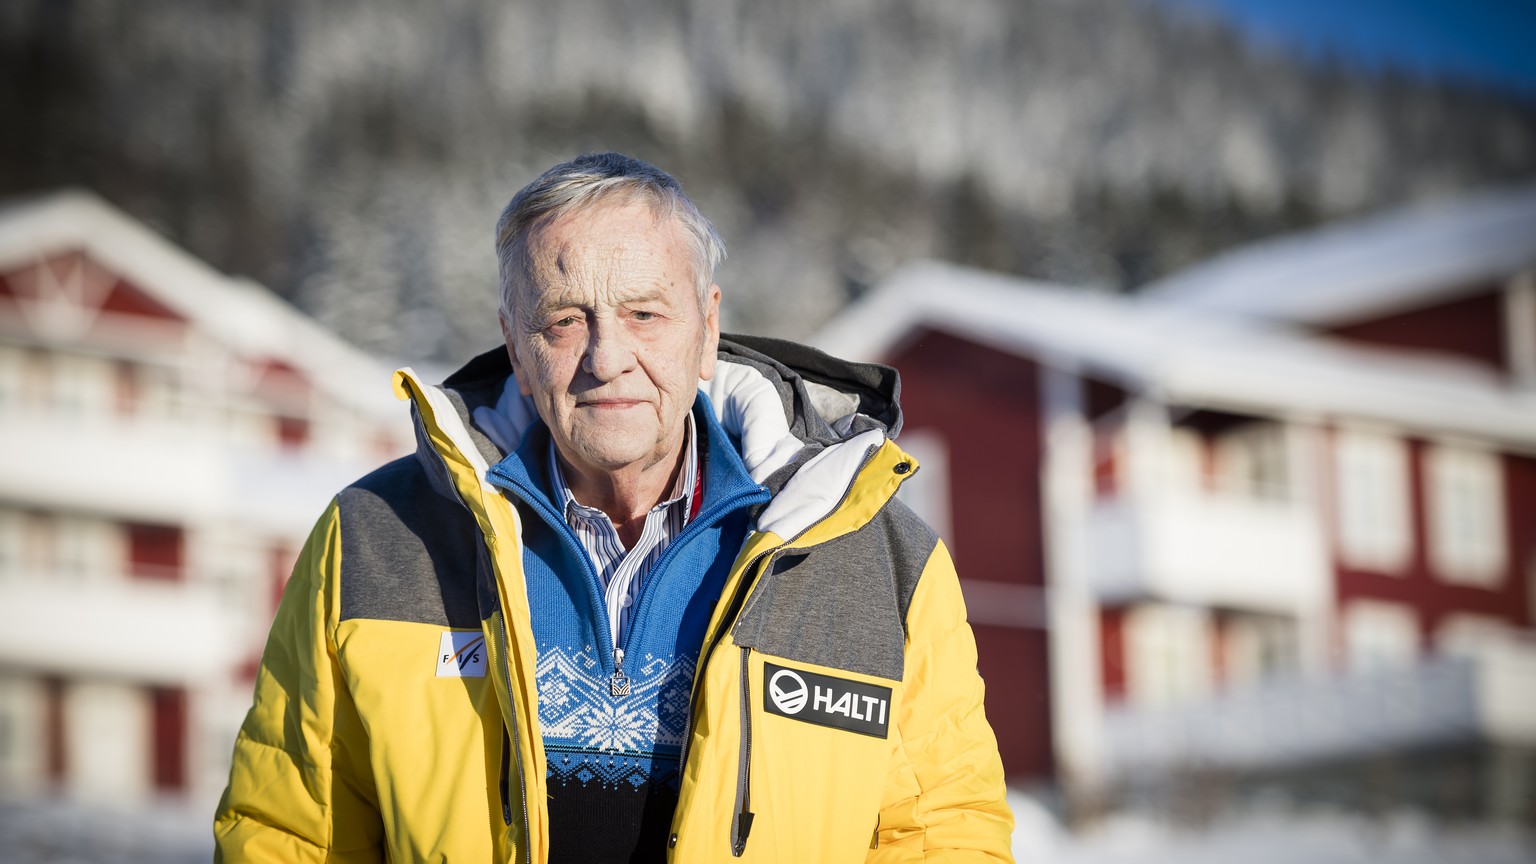 Gian-Franco Kasper, president of the FIS, poses during a press conference at the 2019 FIS Alpine Skiing World Championships in Are, Sweden Monday, February 4, 2019. (KEYSTONE/Jean-Christophe Bott)